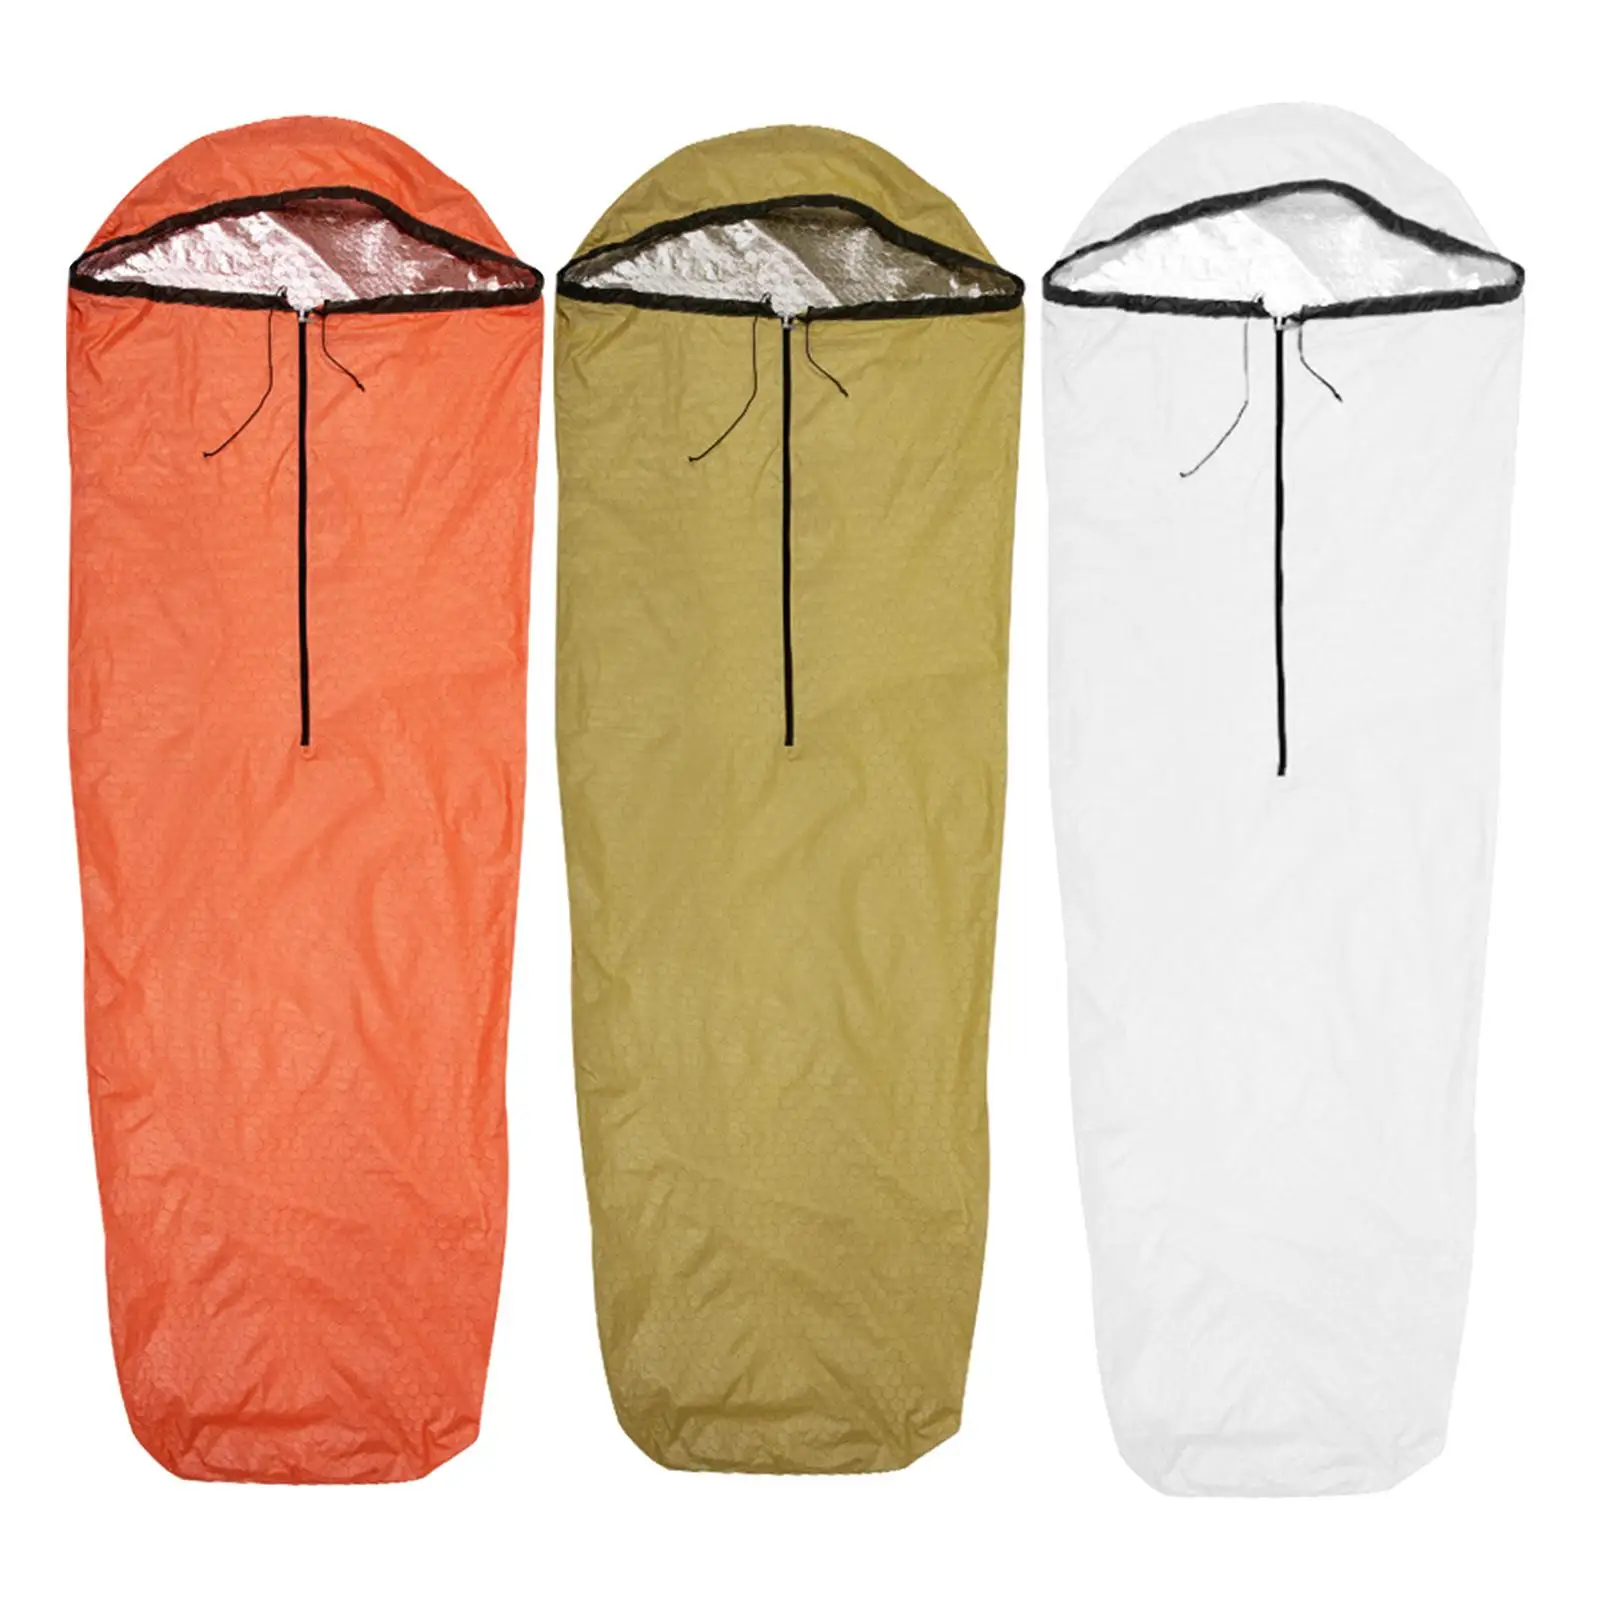 Emergency Sleeping Bag Nylon Cloth for Outdoor Survival Hiking Backpacking